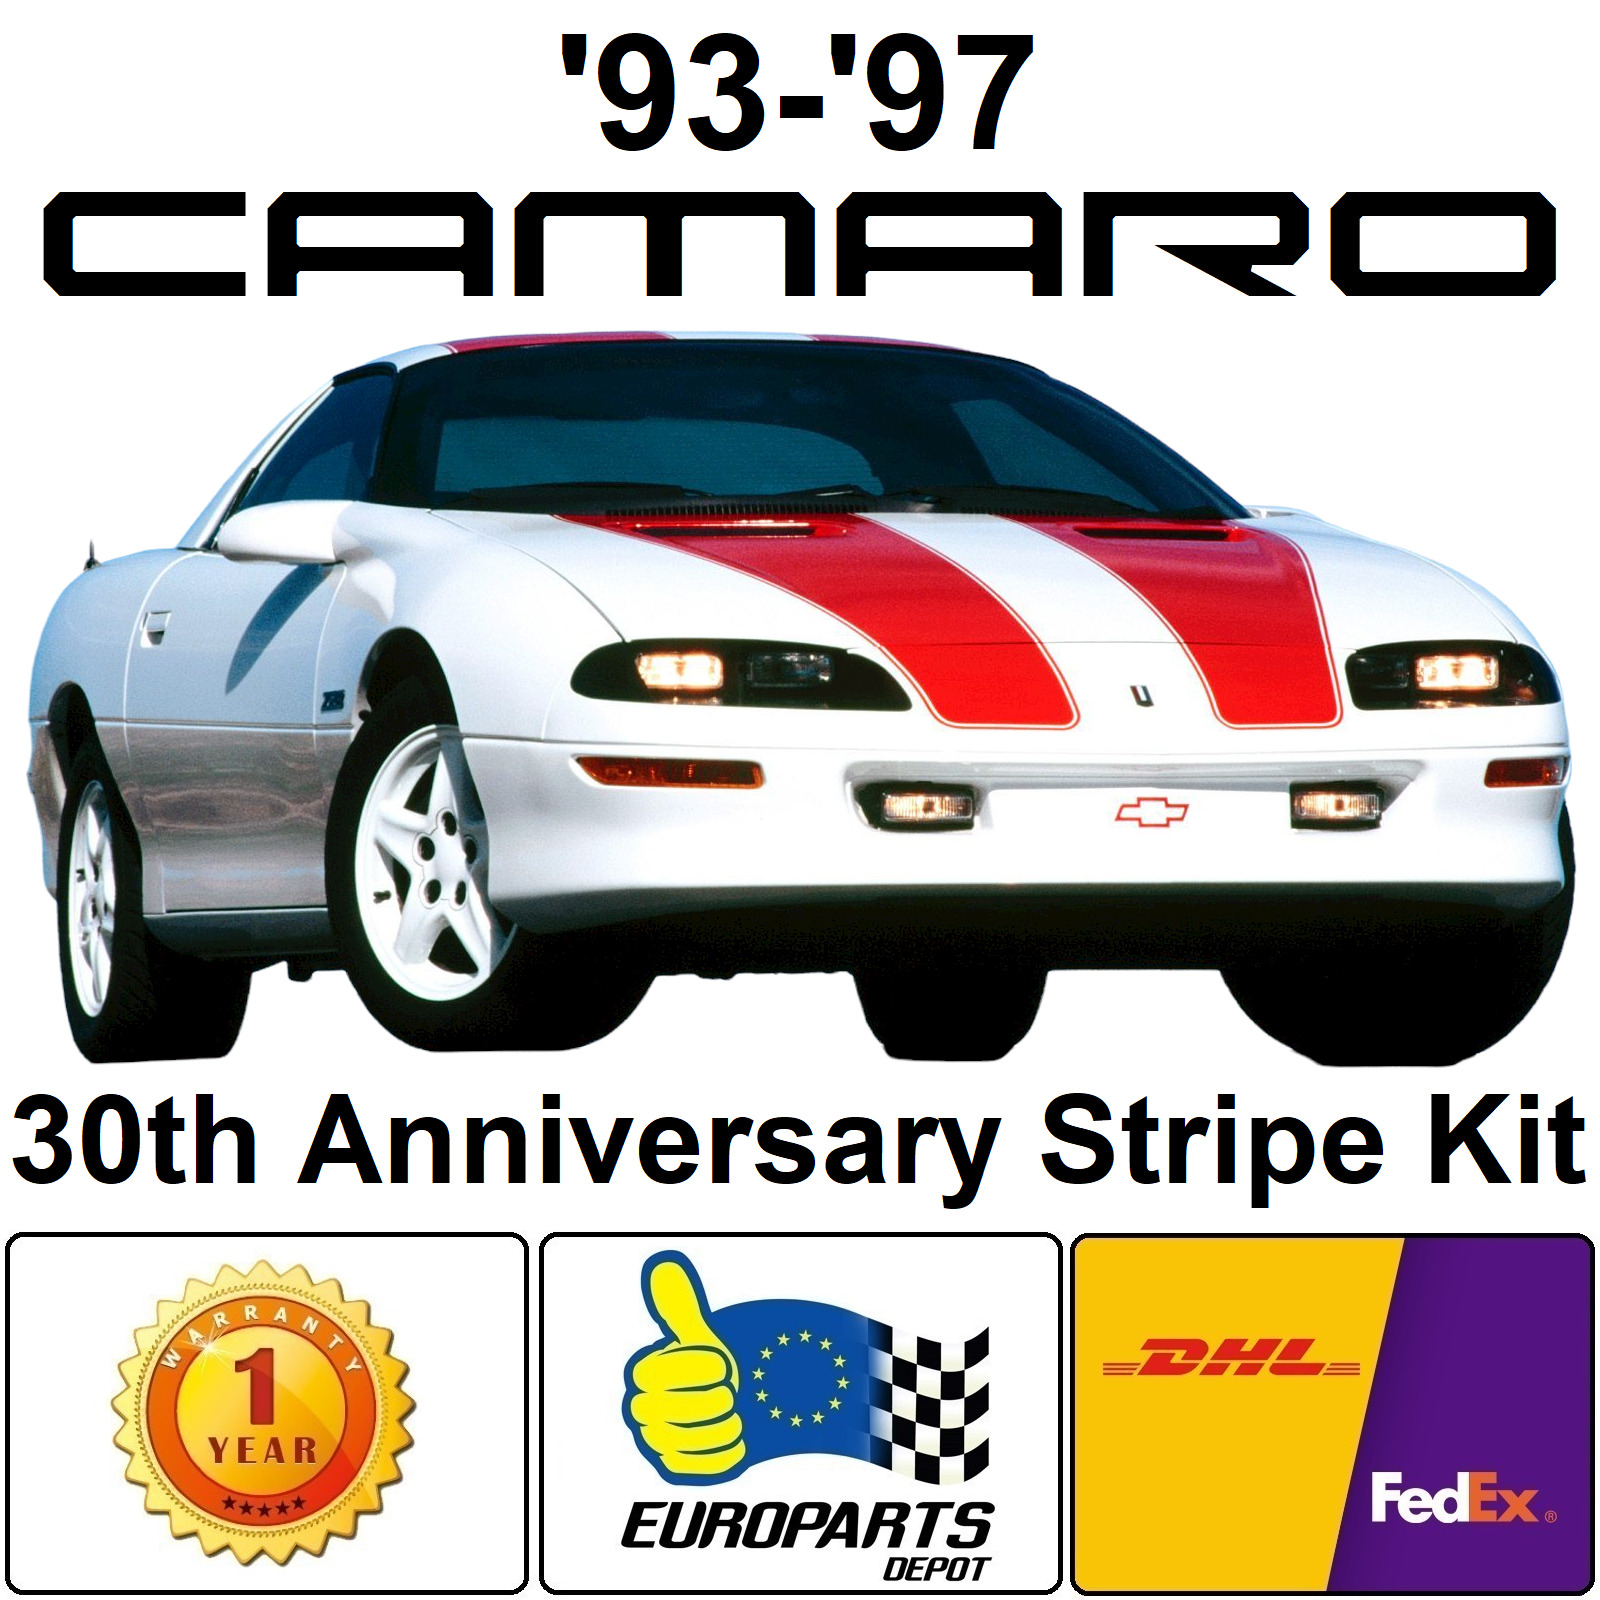 1993-1997 Chevrolet Camaro 30th Anniversary Racing Stripes Decal Kit Coupe T-Top